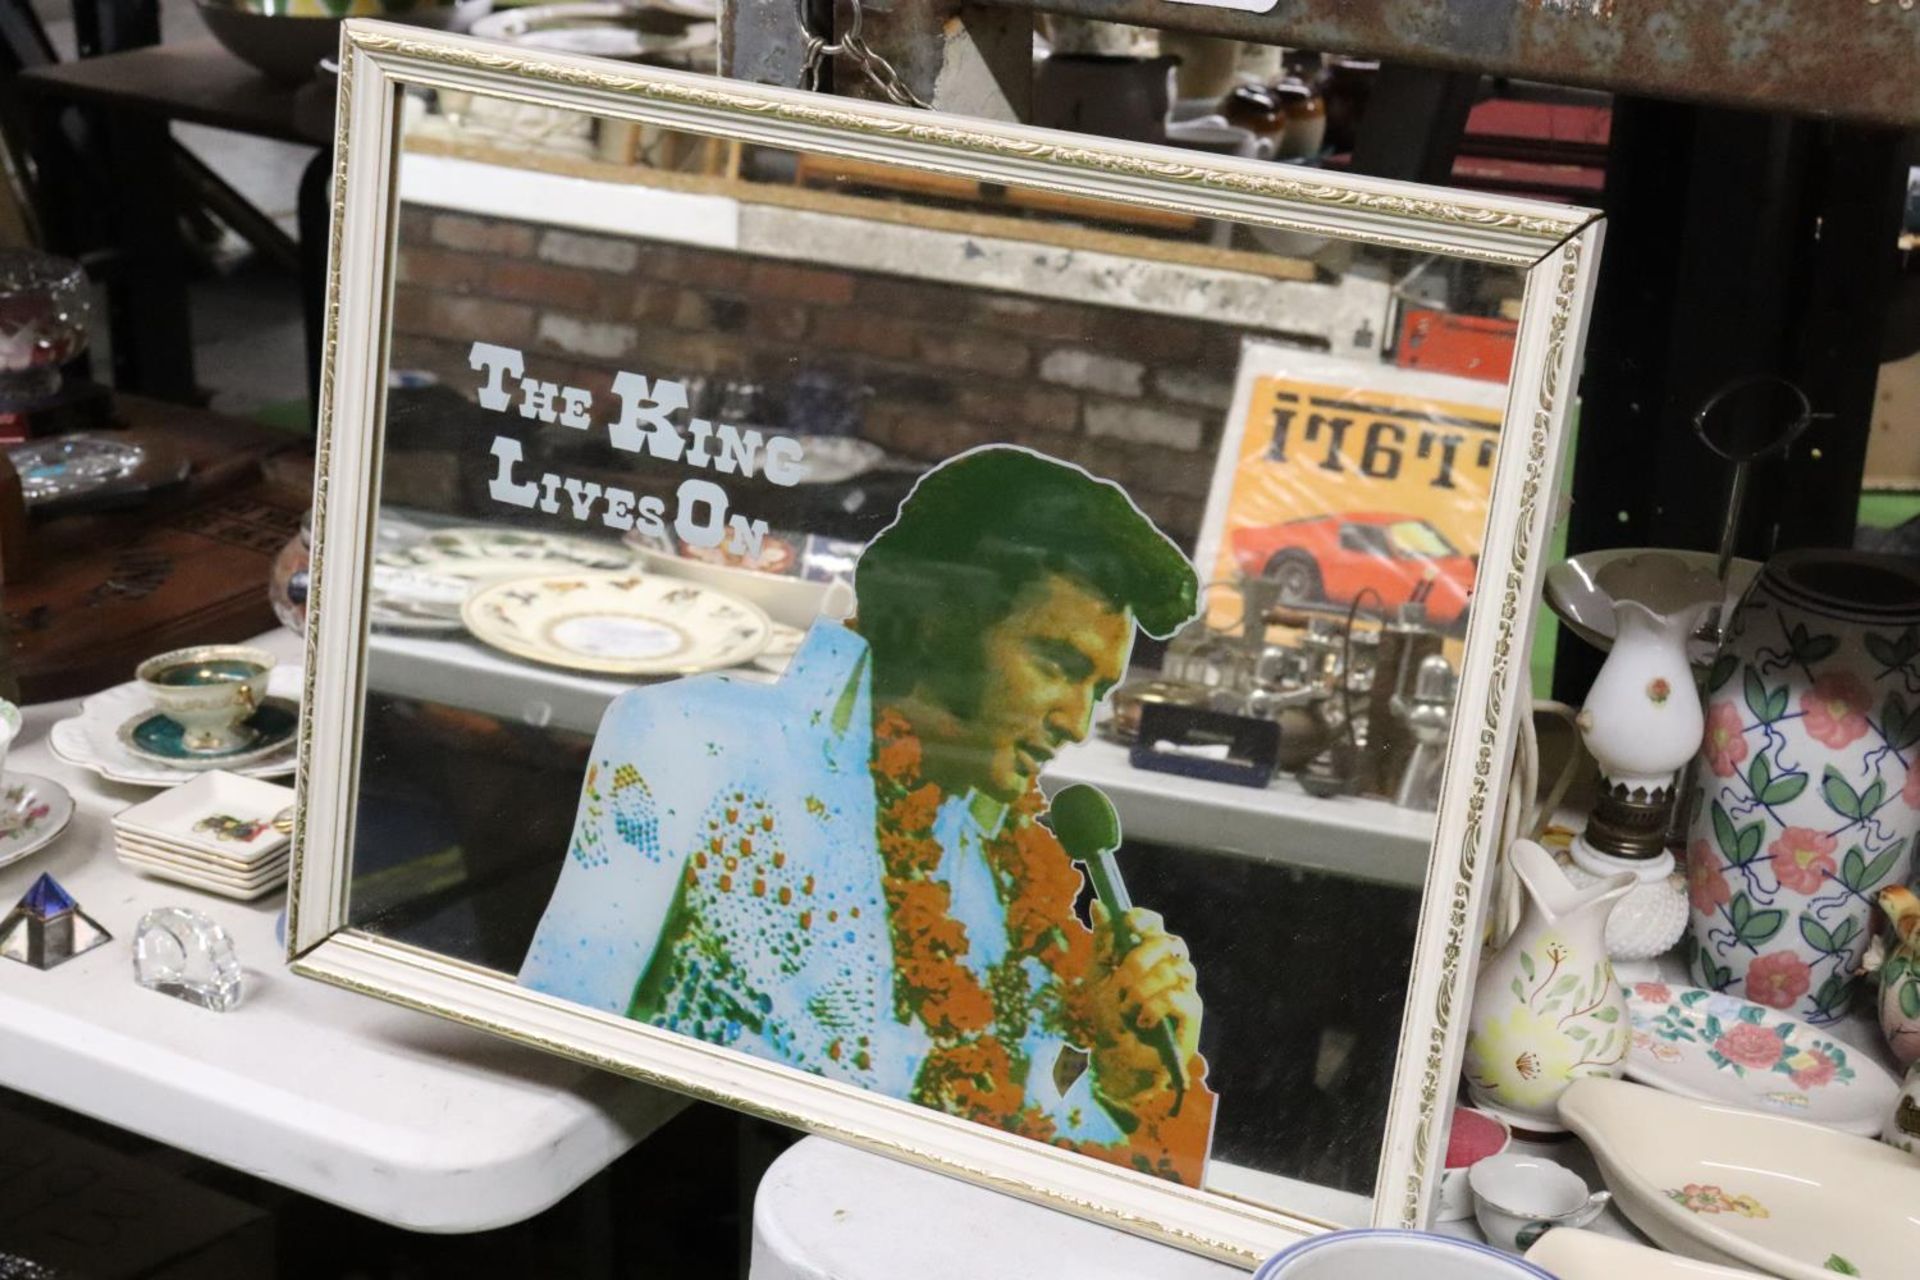 AN ELVIS PRESLEY MIRROR 'THE KING LIVES ON', 50CM X 40CM - Image 2 of 3